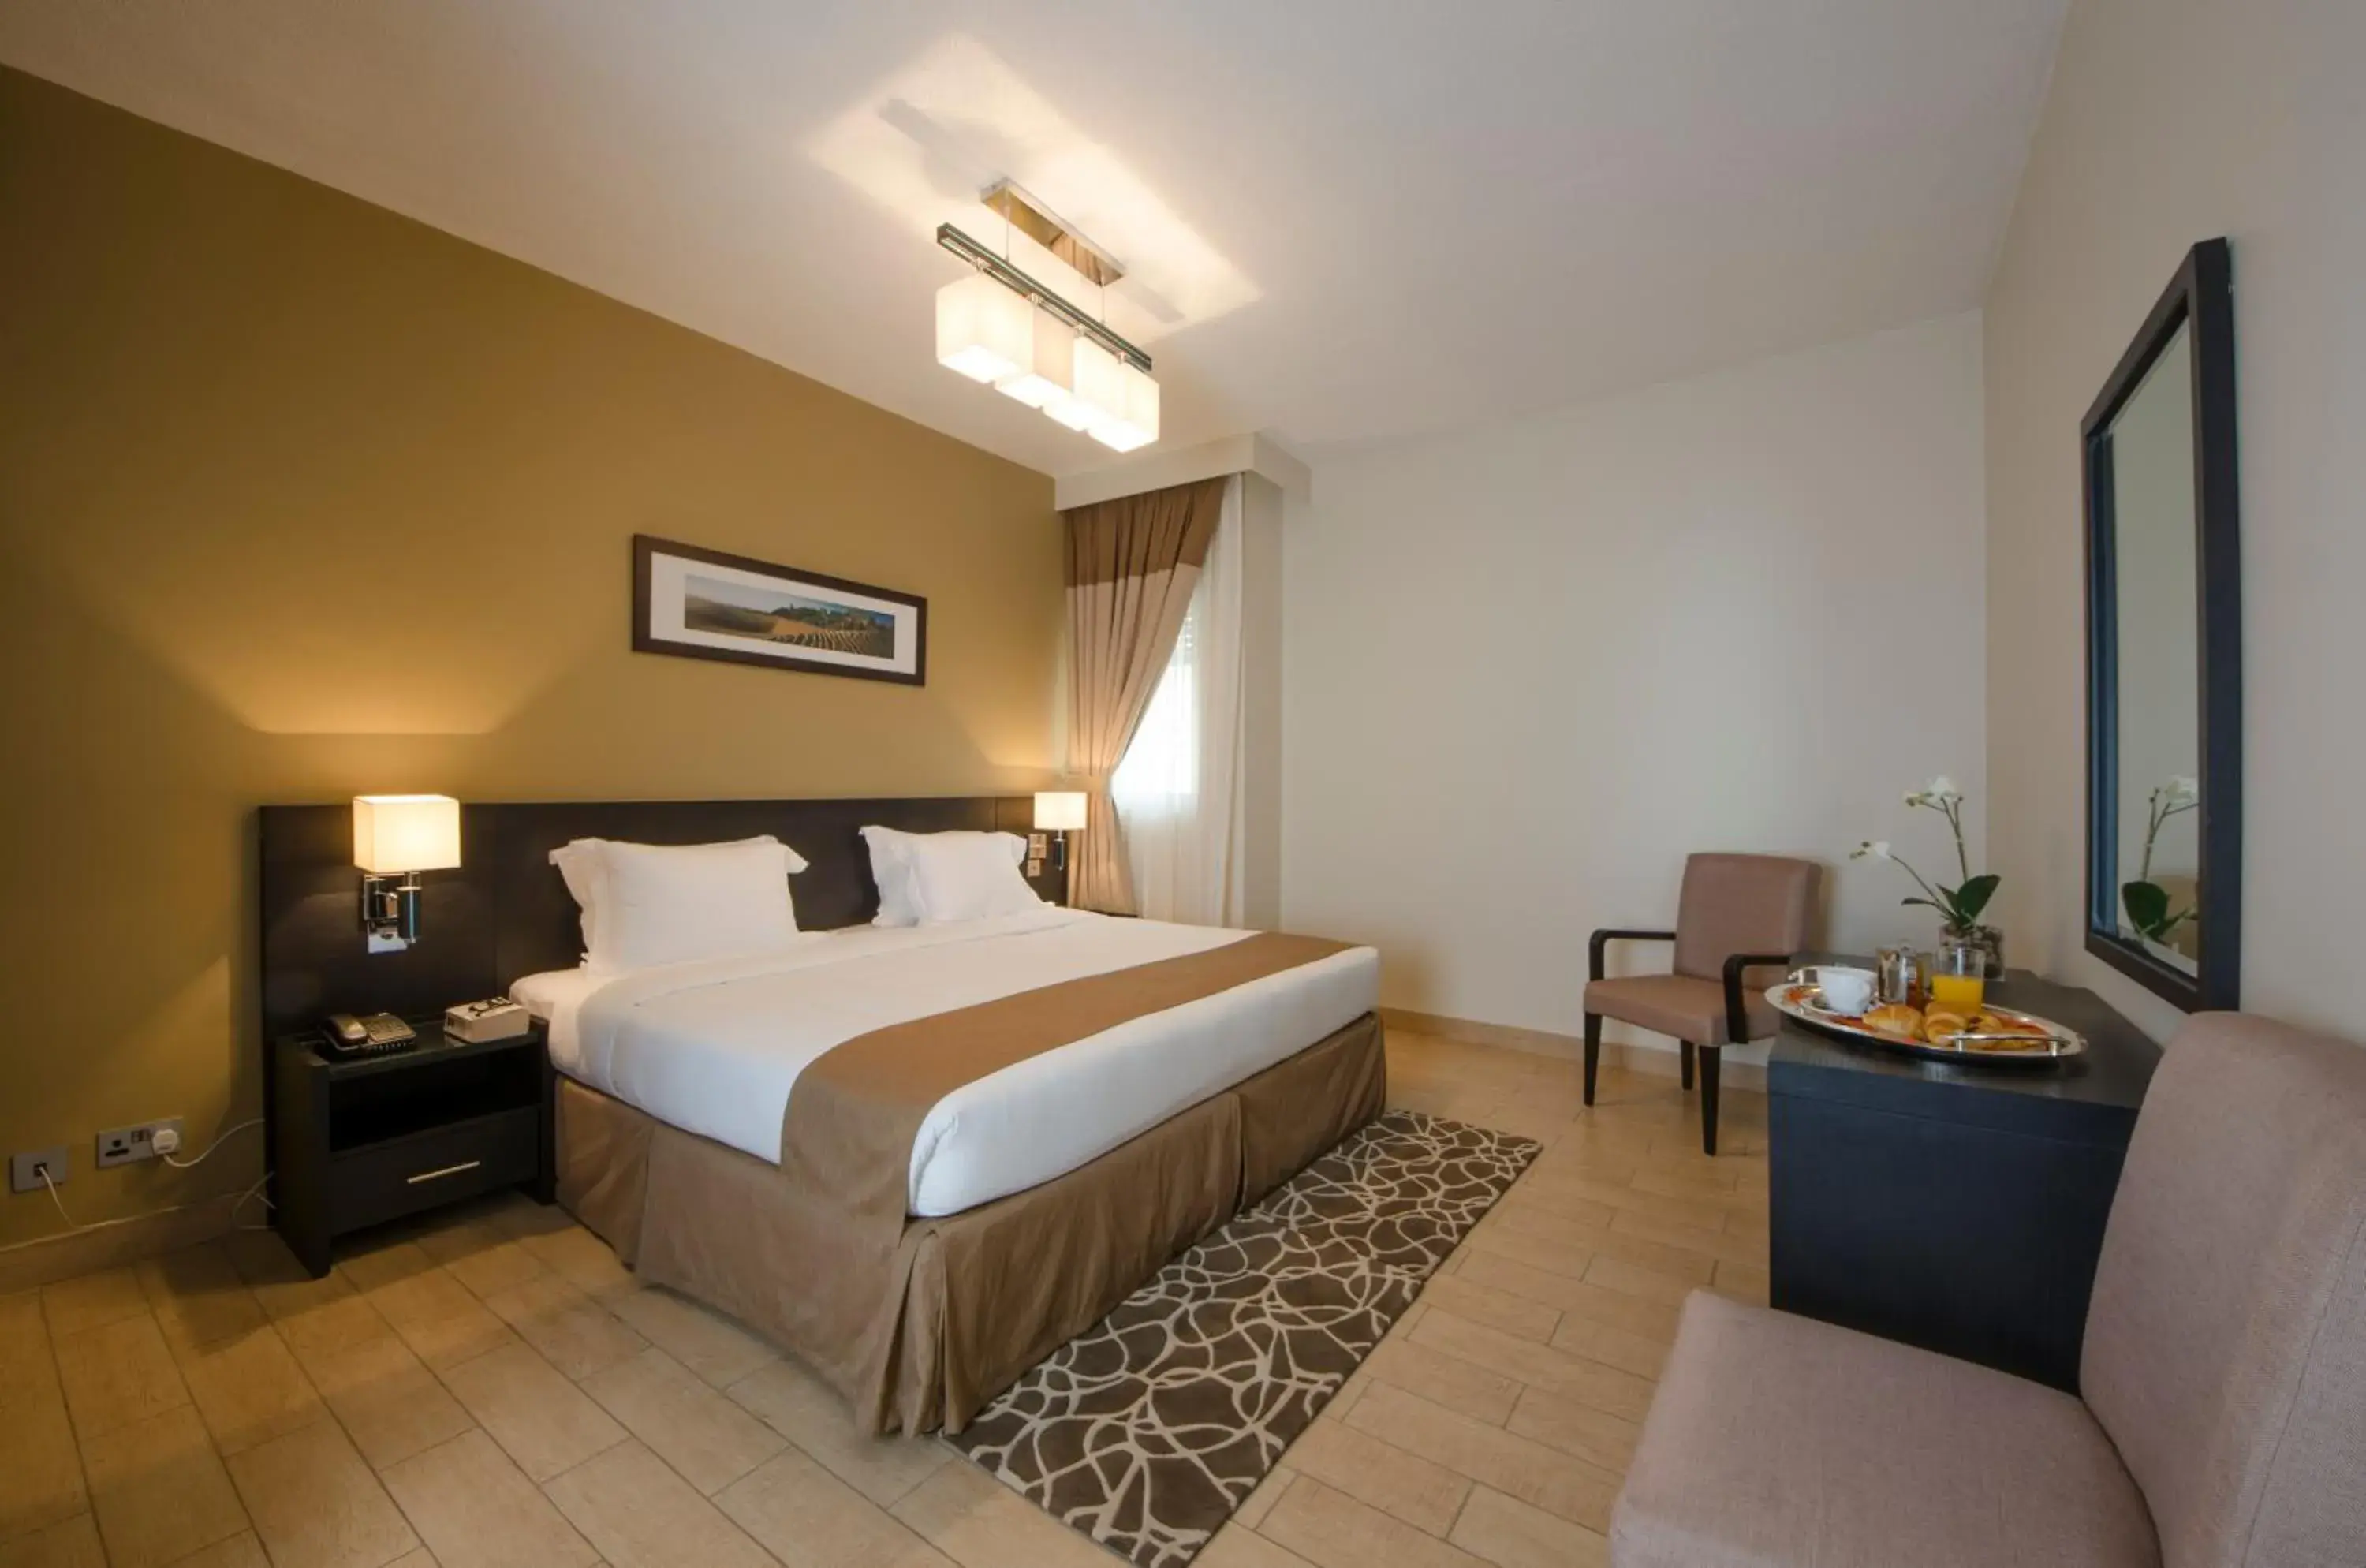 Deluxe One-Bedroom Apartment in The Apartments, Dubai World Trade Centre Hotel Apartments